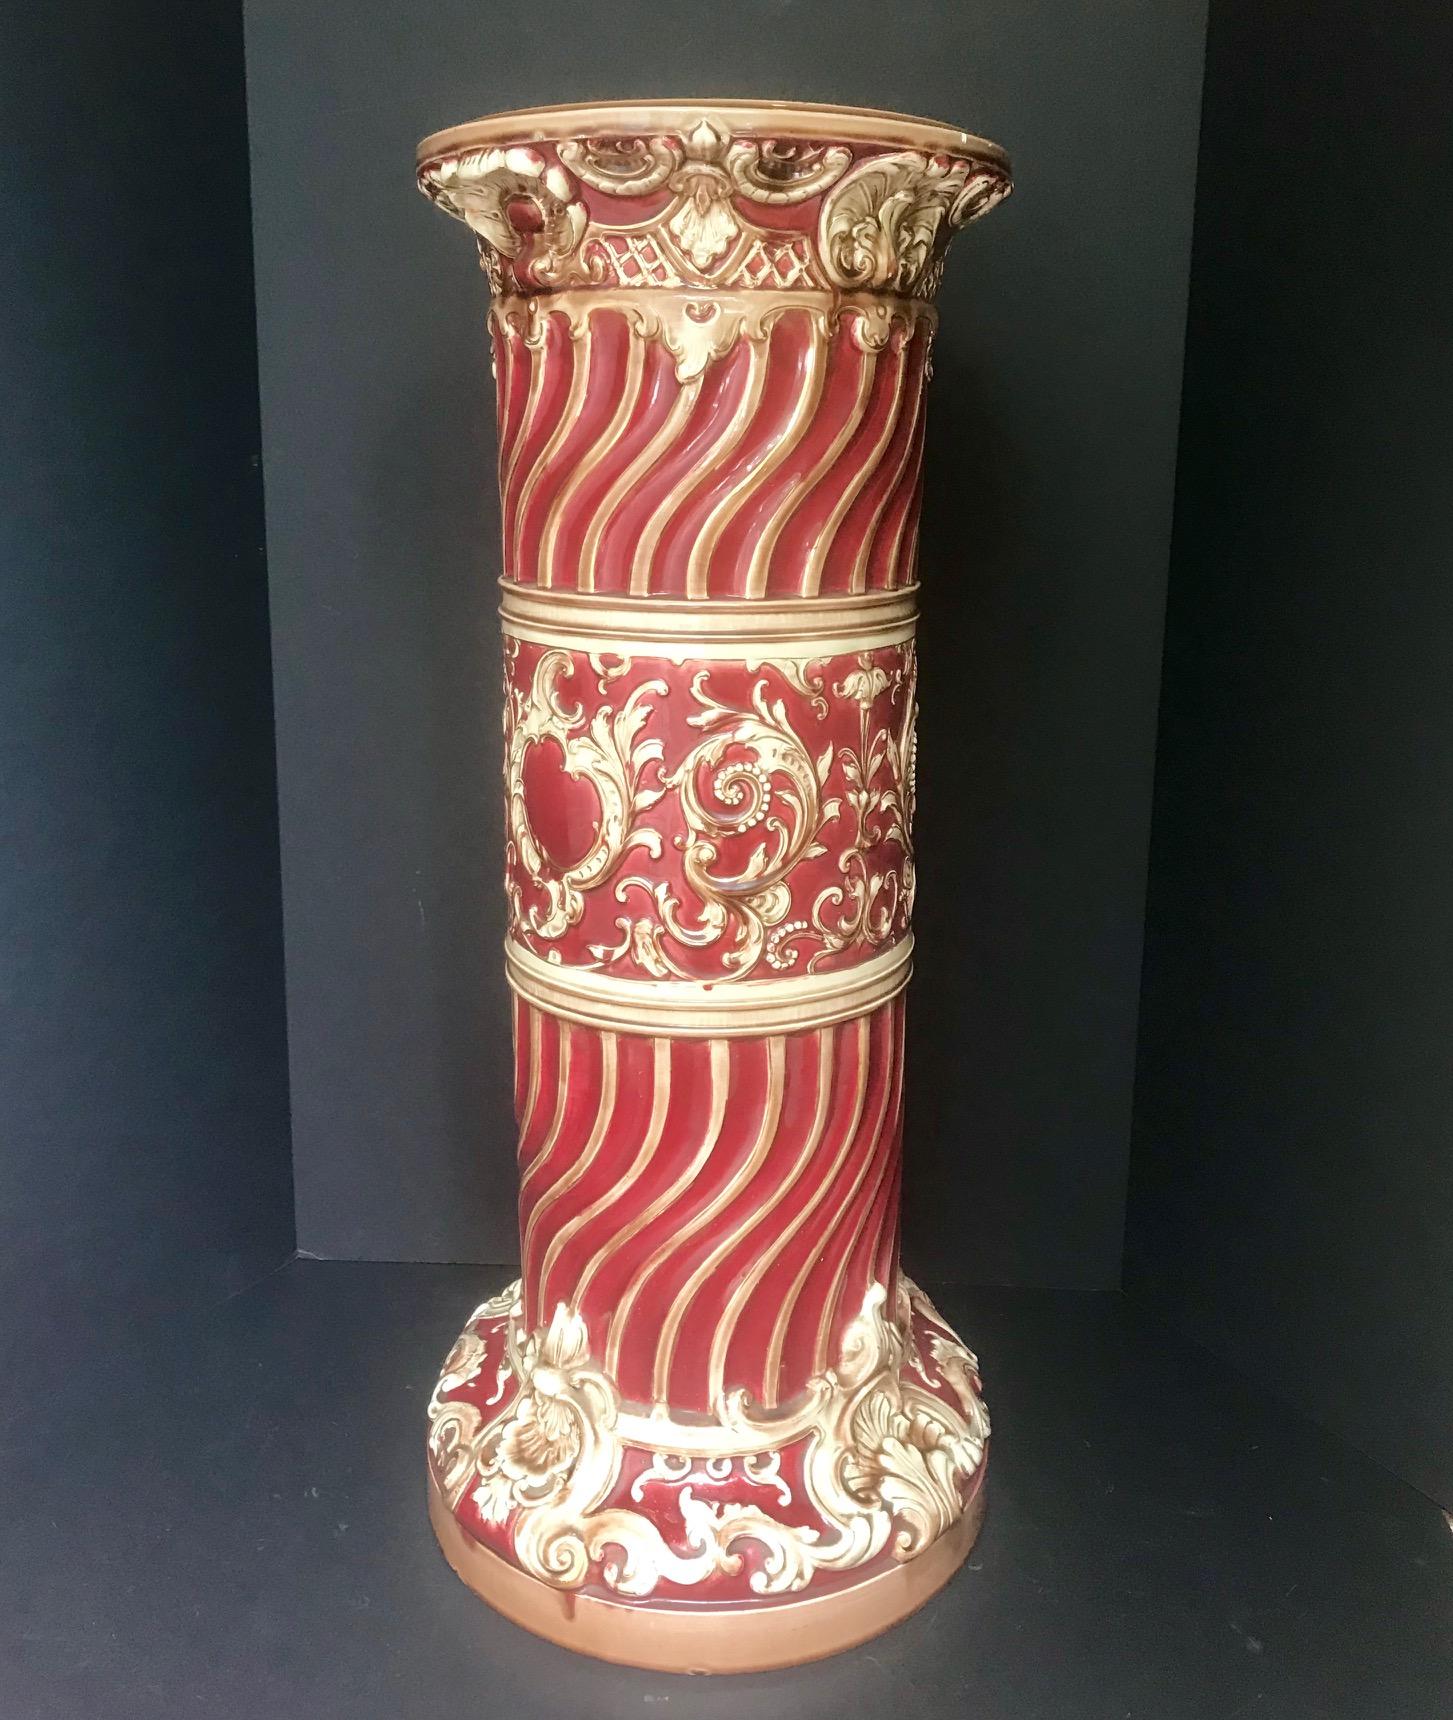 This large Victorian majolica pedestal has classic rocaille decorations. The vibrant and strong polychrome burgundy color is enhanced by the superb glaze. The ivory colored rocaille are accented with gilt highlights. Inside the glazed base the